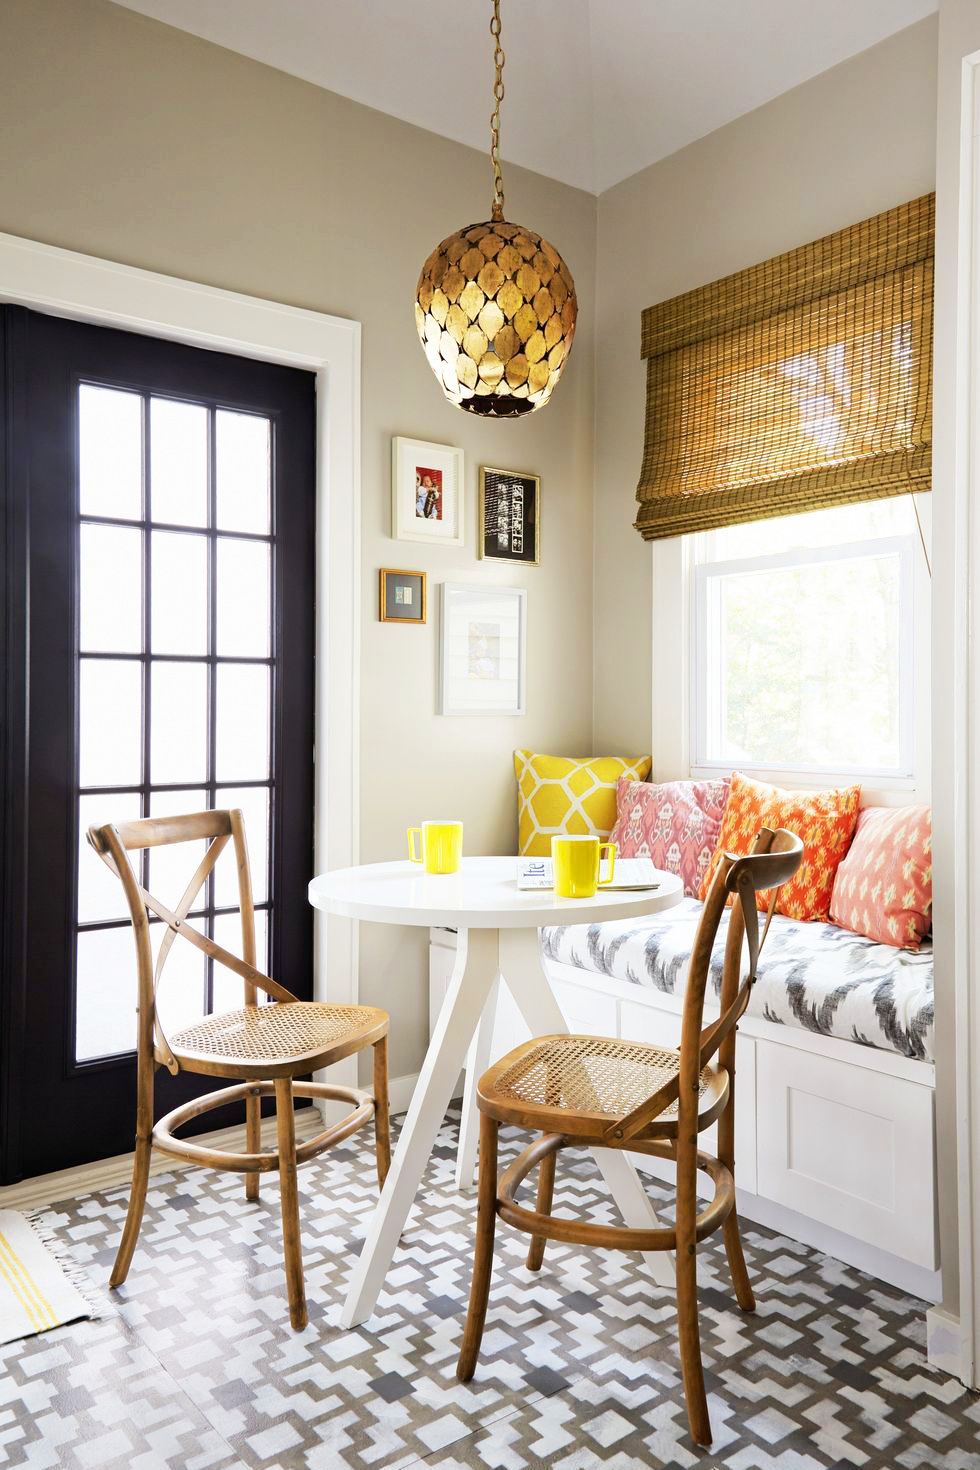 kitchen and dining room designs for small spaces